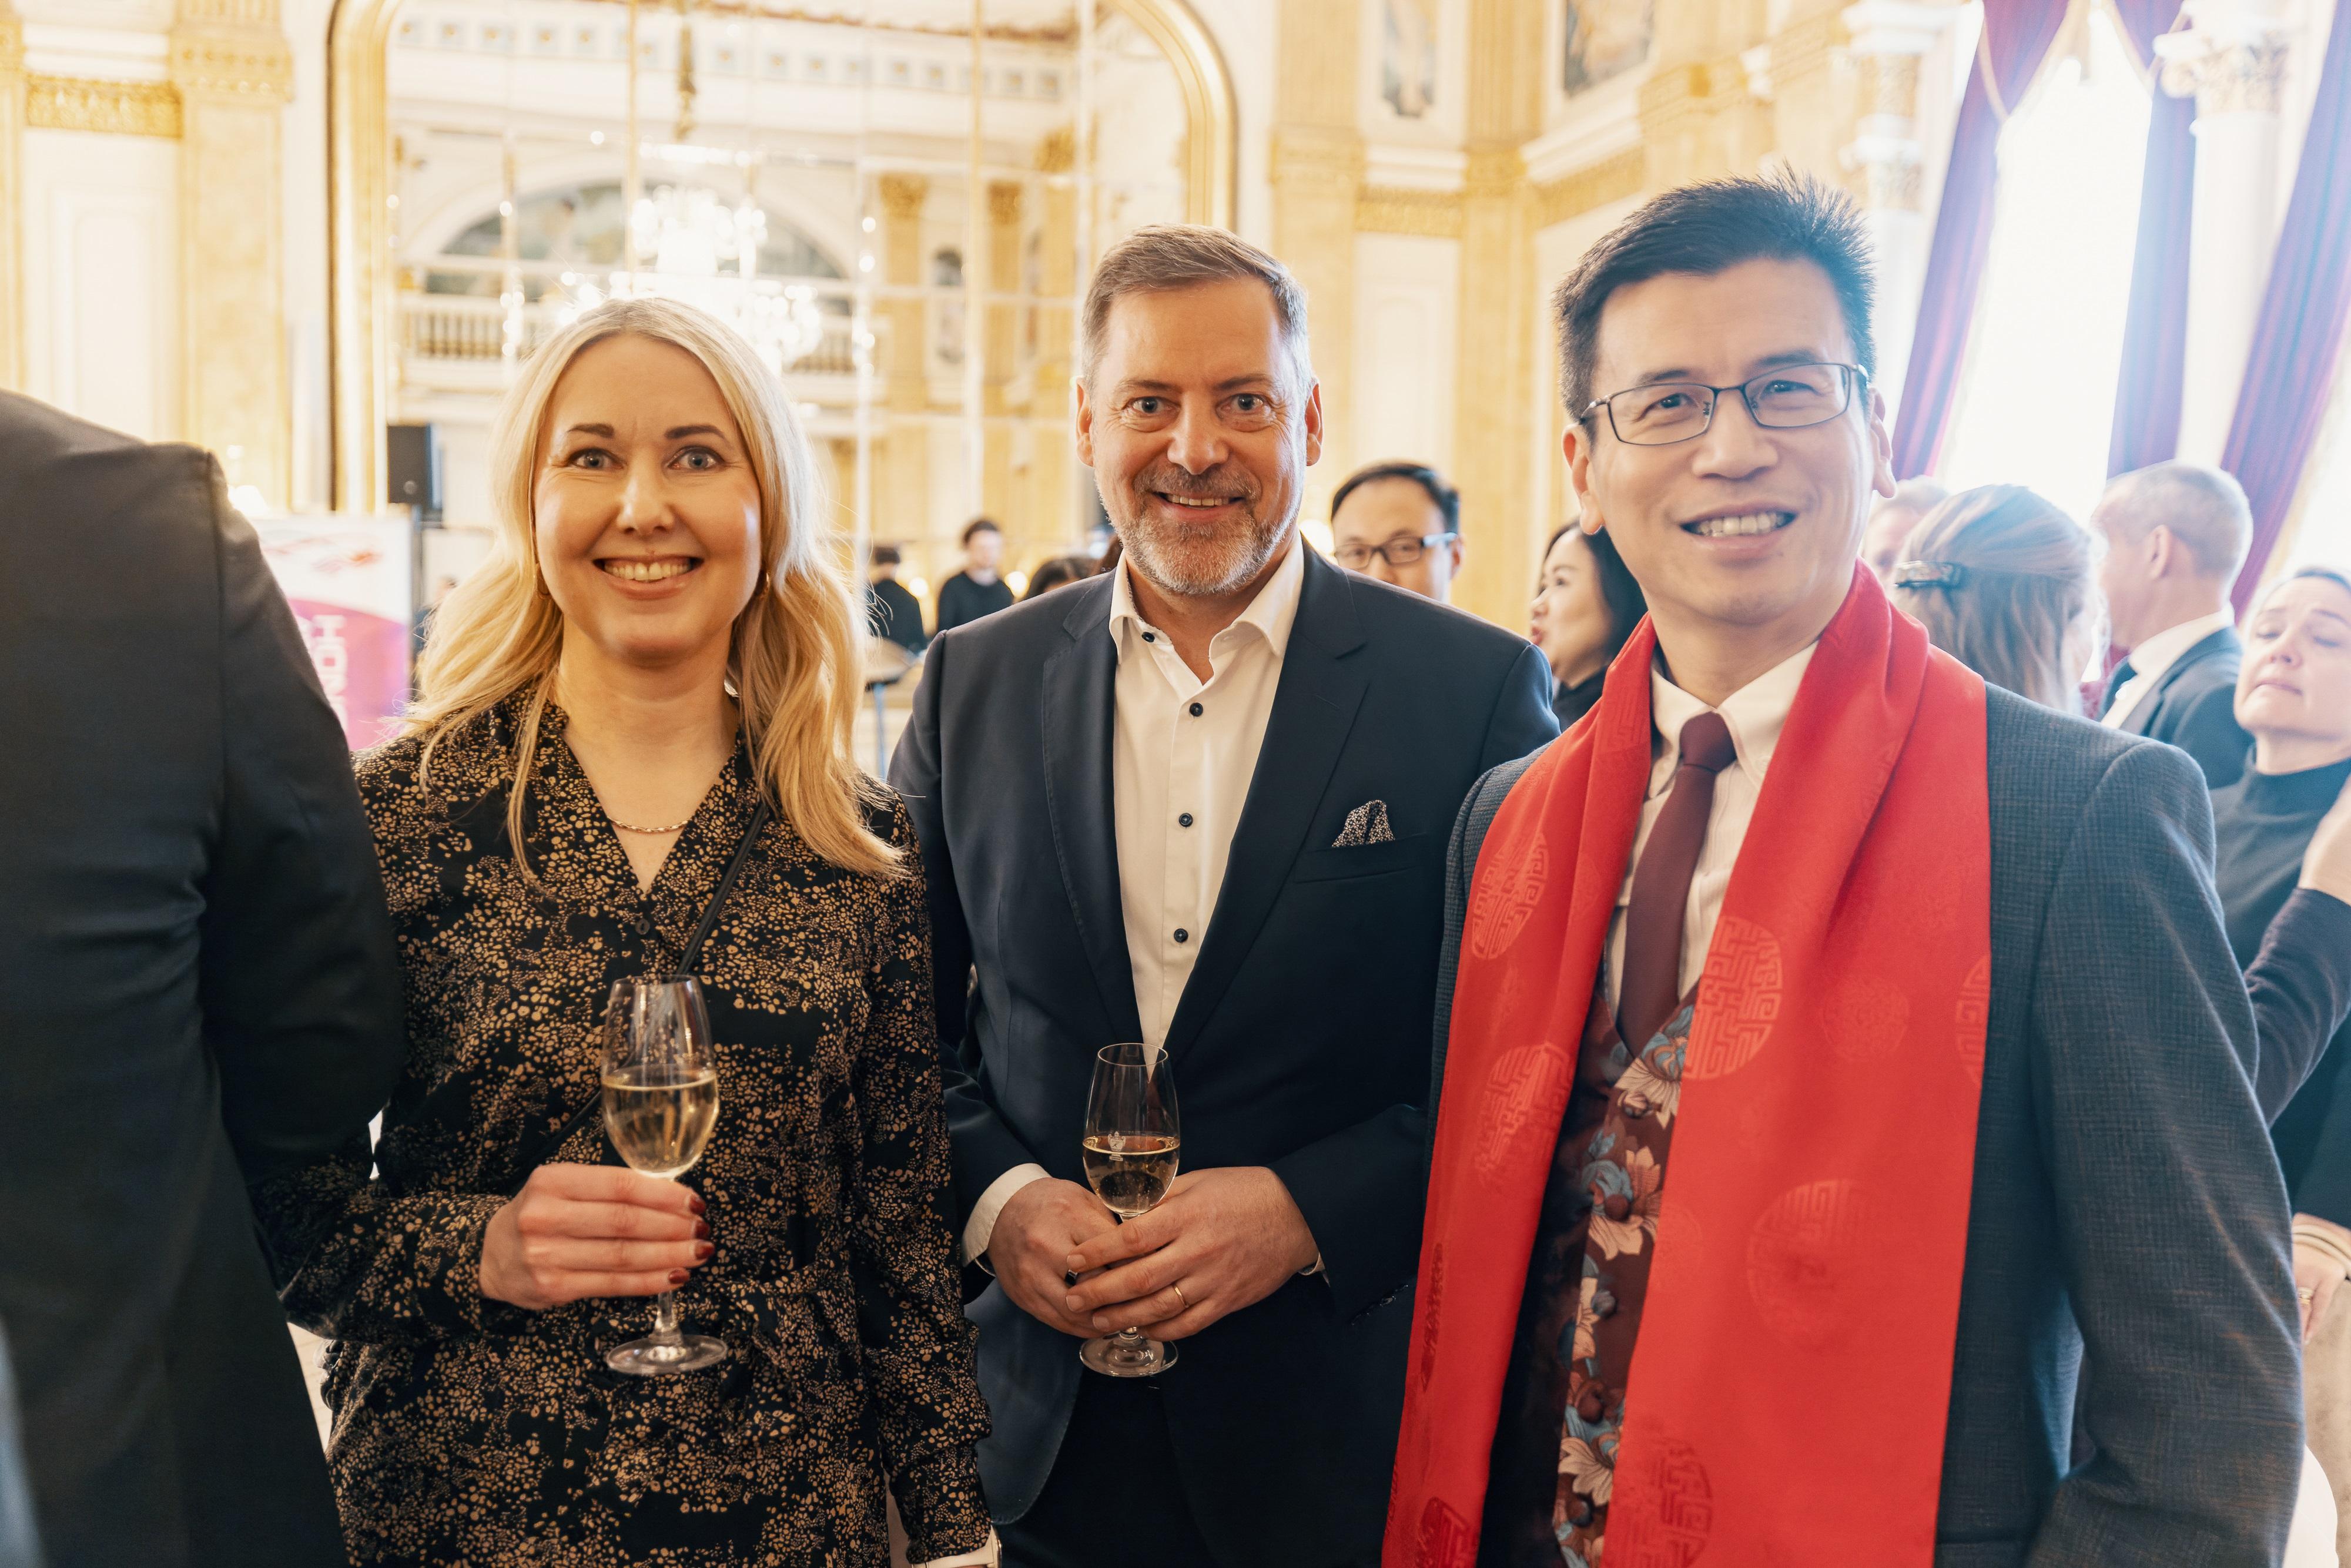 The Hong Kong Economic and Trade Office, London (London ETO) and the Finland-Hong Kong Business Association co-hosted a Year of the Dragon lunch reception in Helsinki, Finland, on March 5 (Helsinki time). Photo shows (from left) the Chairman of the Finland-Hong Kong Business Association, Ms Tiina Mikkonen; the Chairman of Finland-China Business Association, Mr Timo Helosuo; and the Director-General of the London ETO, Mr Gilford Law, at the lunch reception.